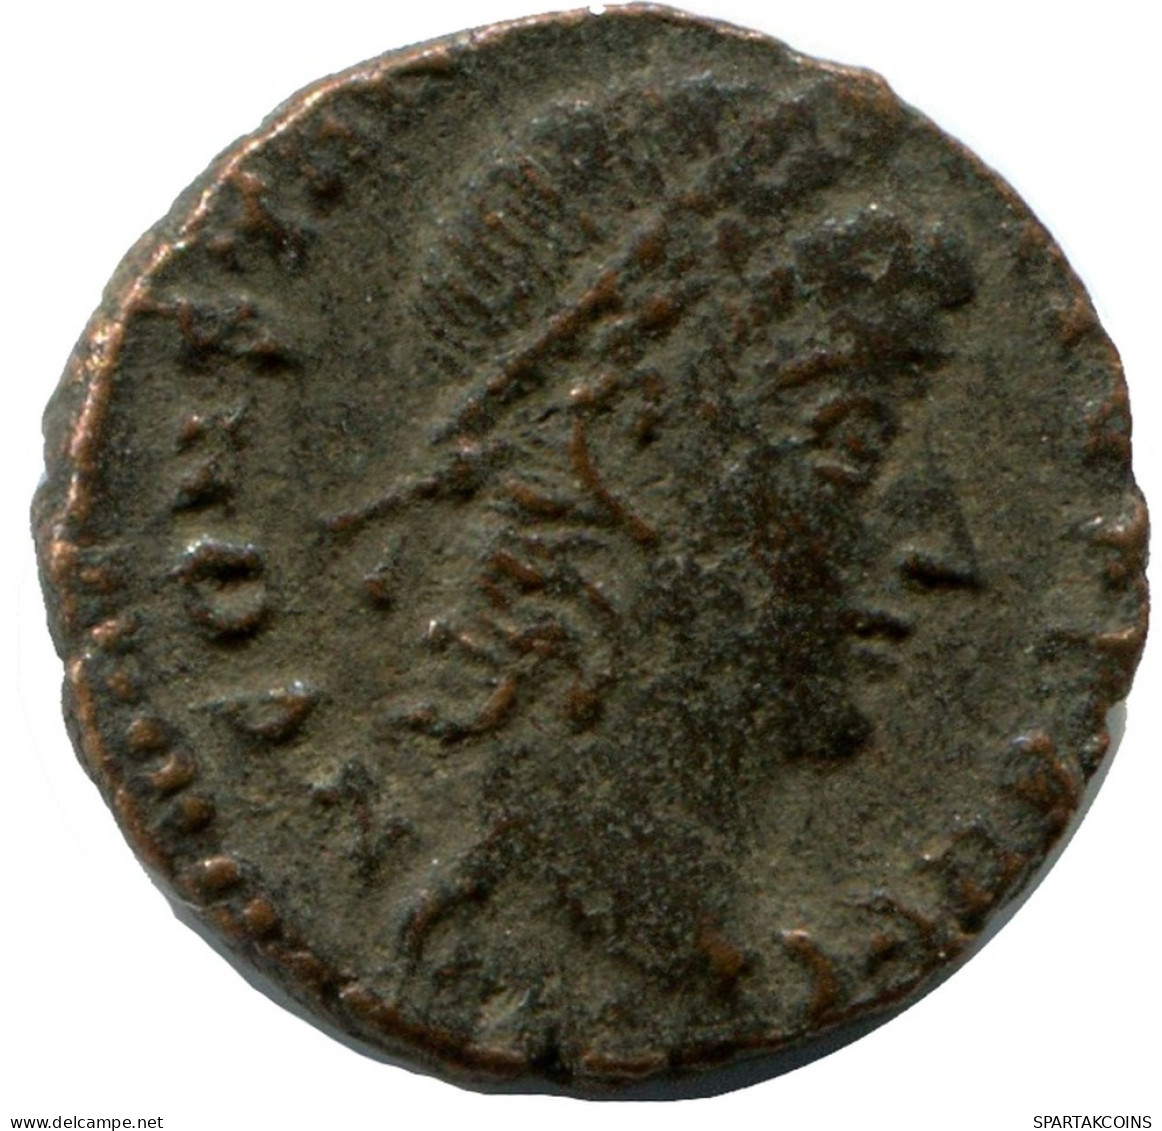 CONSTANTIUS II ALEKSANDRIA FROM THE ROYAL ONTARIO MUSEUM #ANC10497.14.U.A - The Christian Empire (307 AD Tot 363 AD)